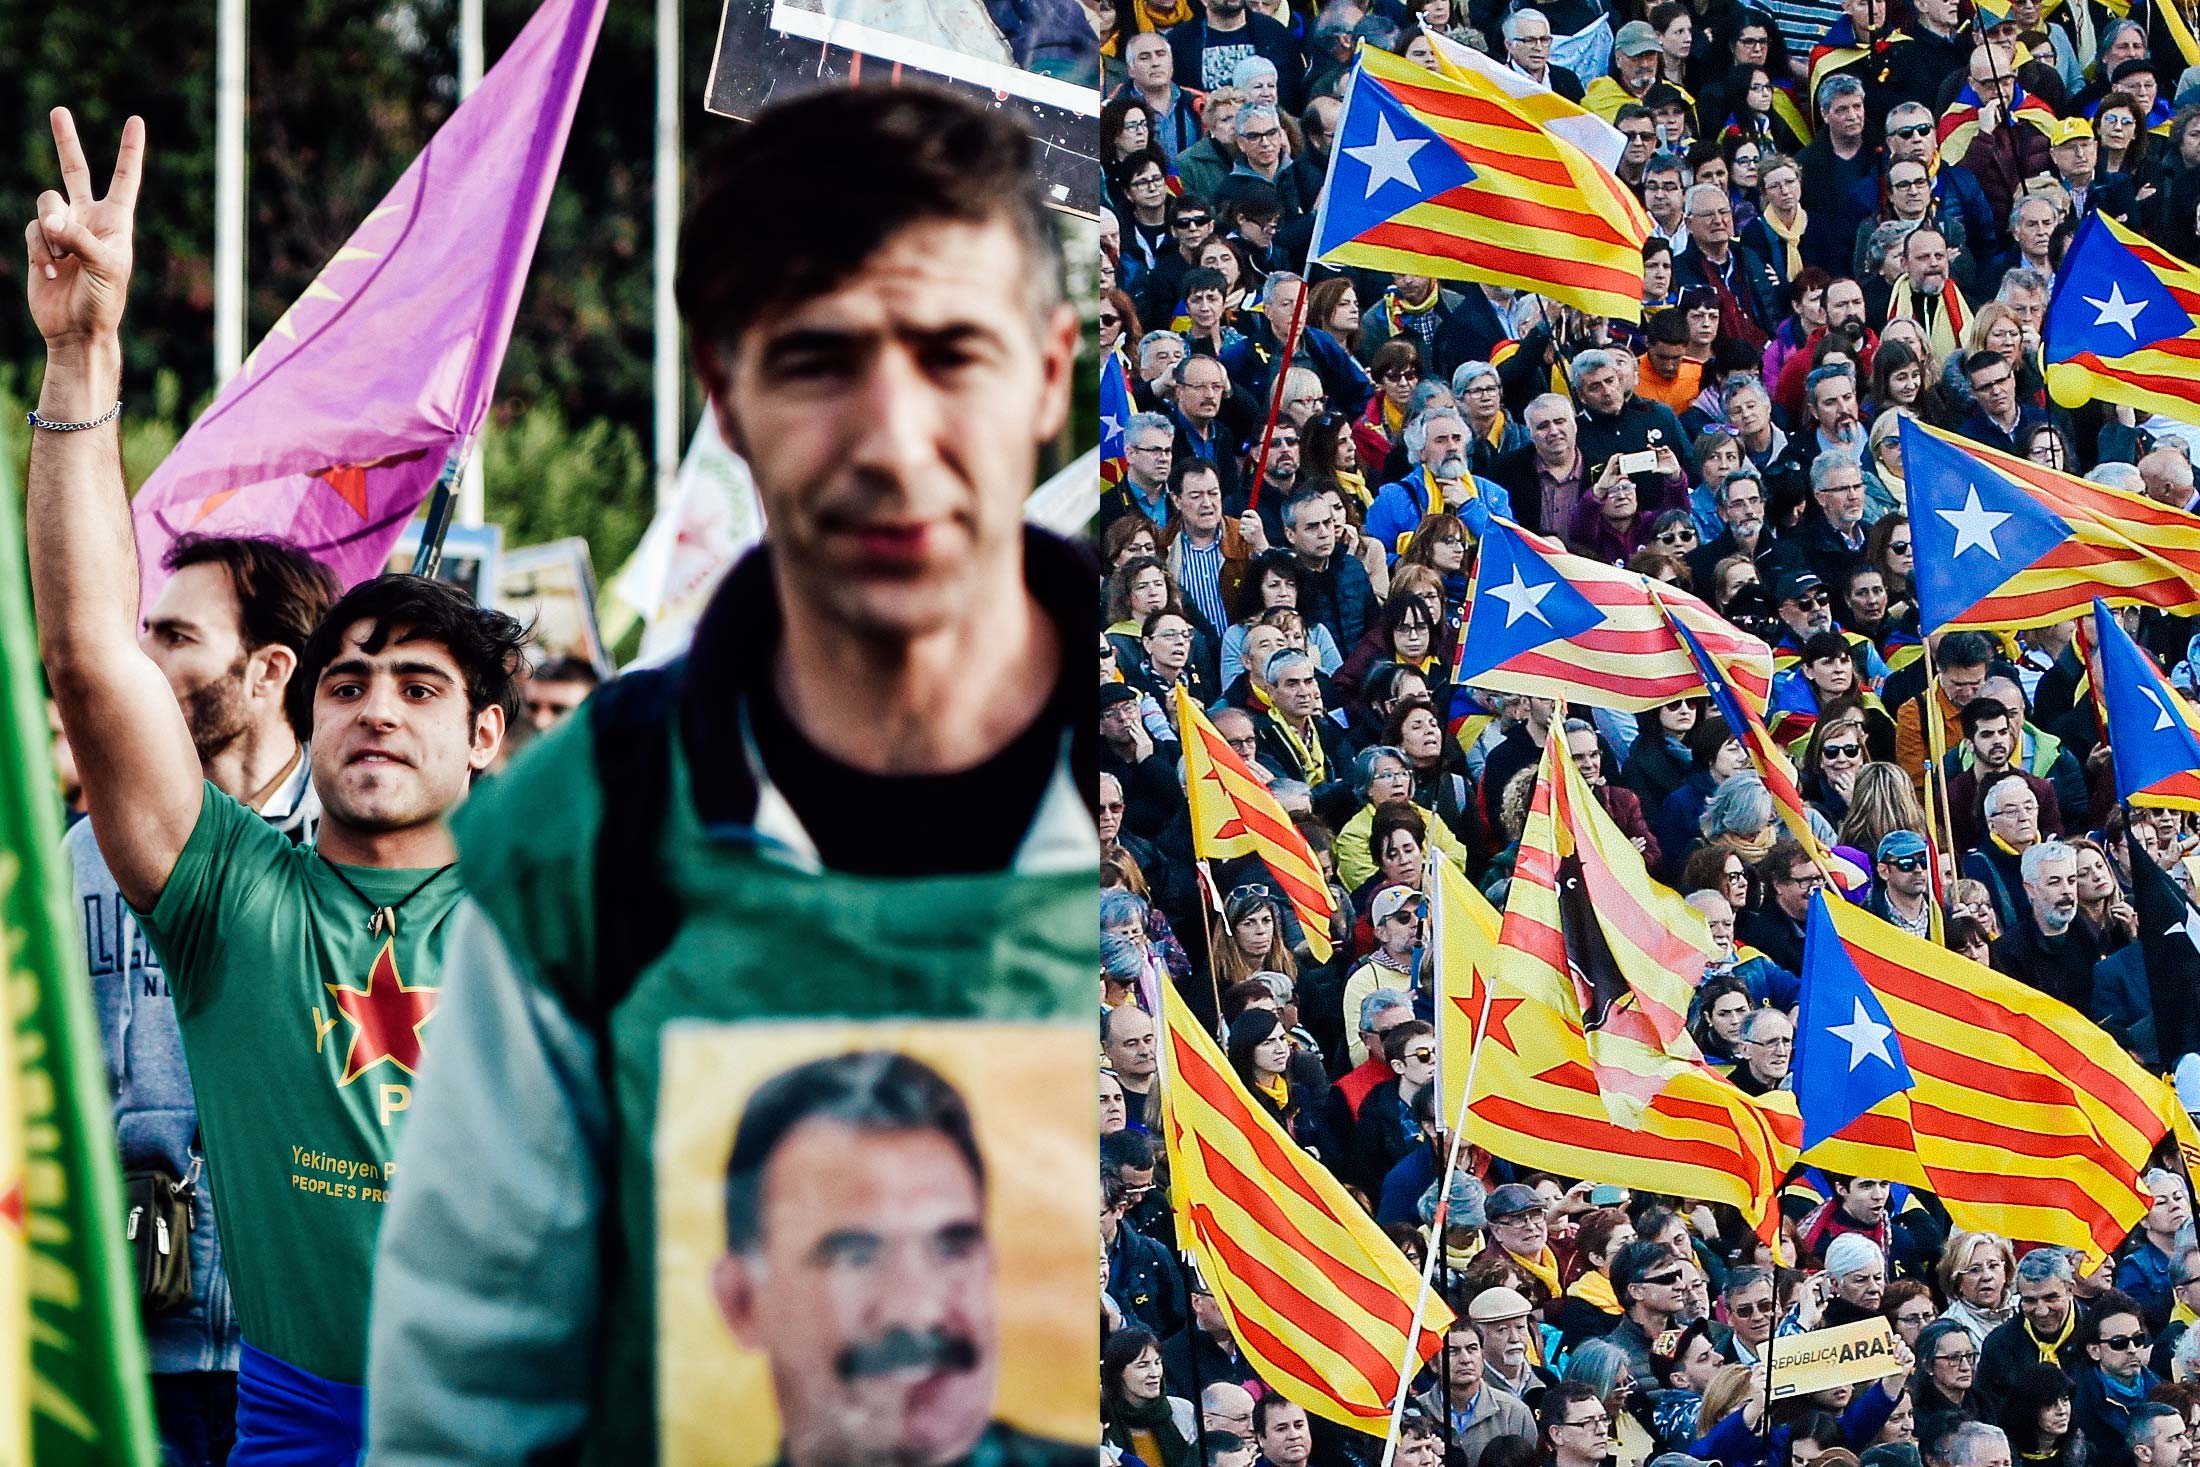 Kurdish supporters protesting, Catalan supporters protesting.